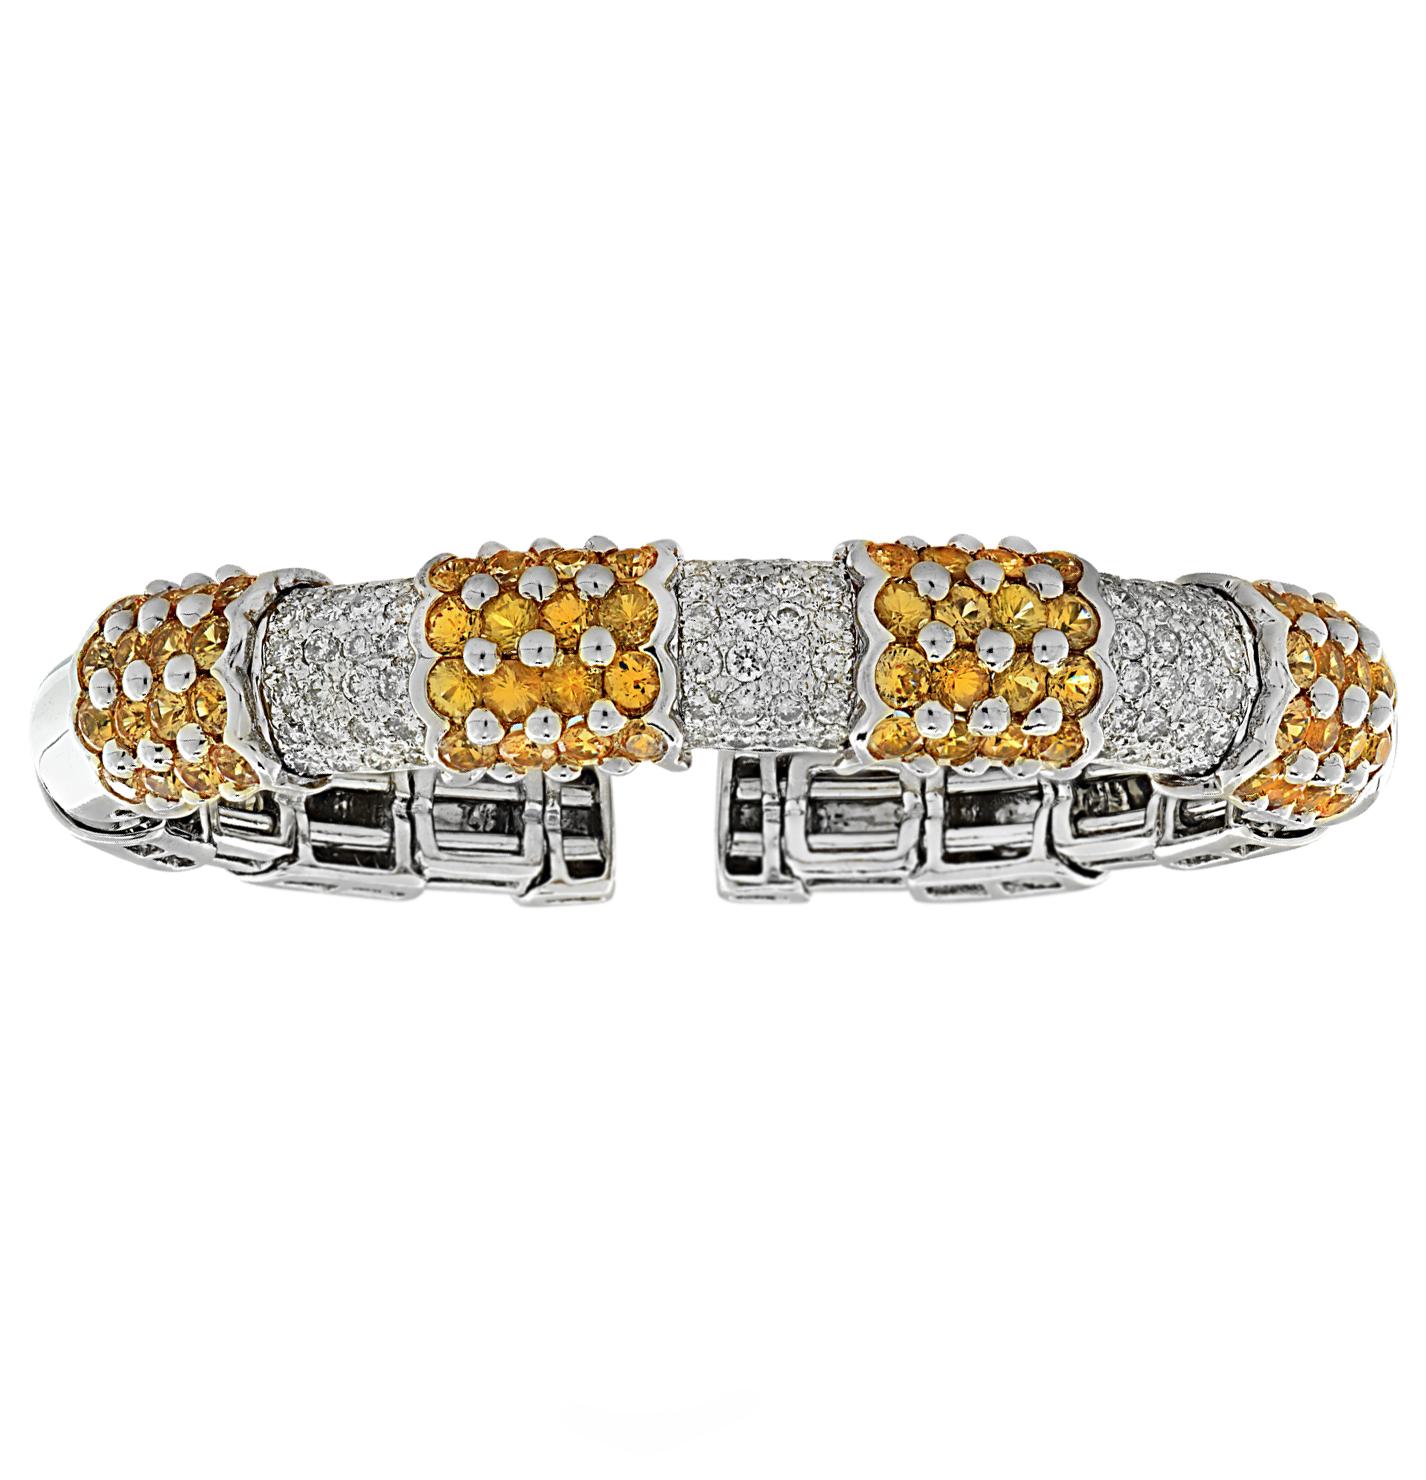 Stunning bangle bracelet crafted in 18 Karat white and yellow gold featuring 72 round brilliant cut diamonds weighing approximately 2 carats total, G color, VS clarity and 32 Yellow Sapphires weighing approximately 2 carats total. The diamonds are